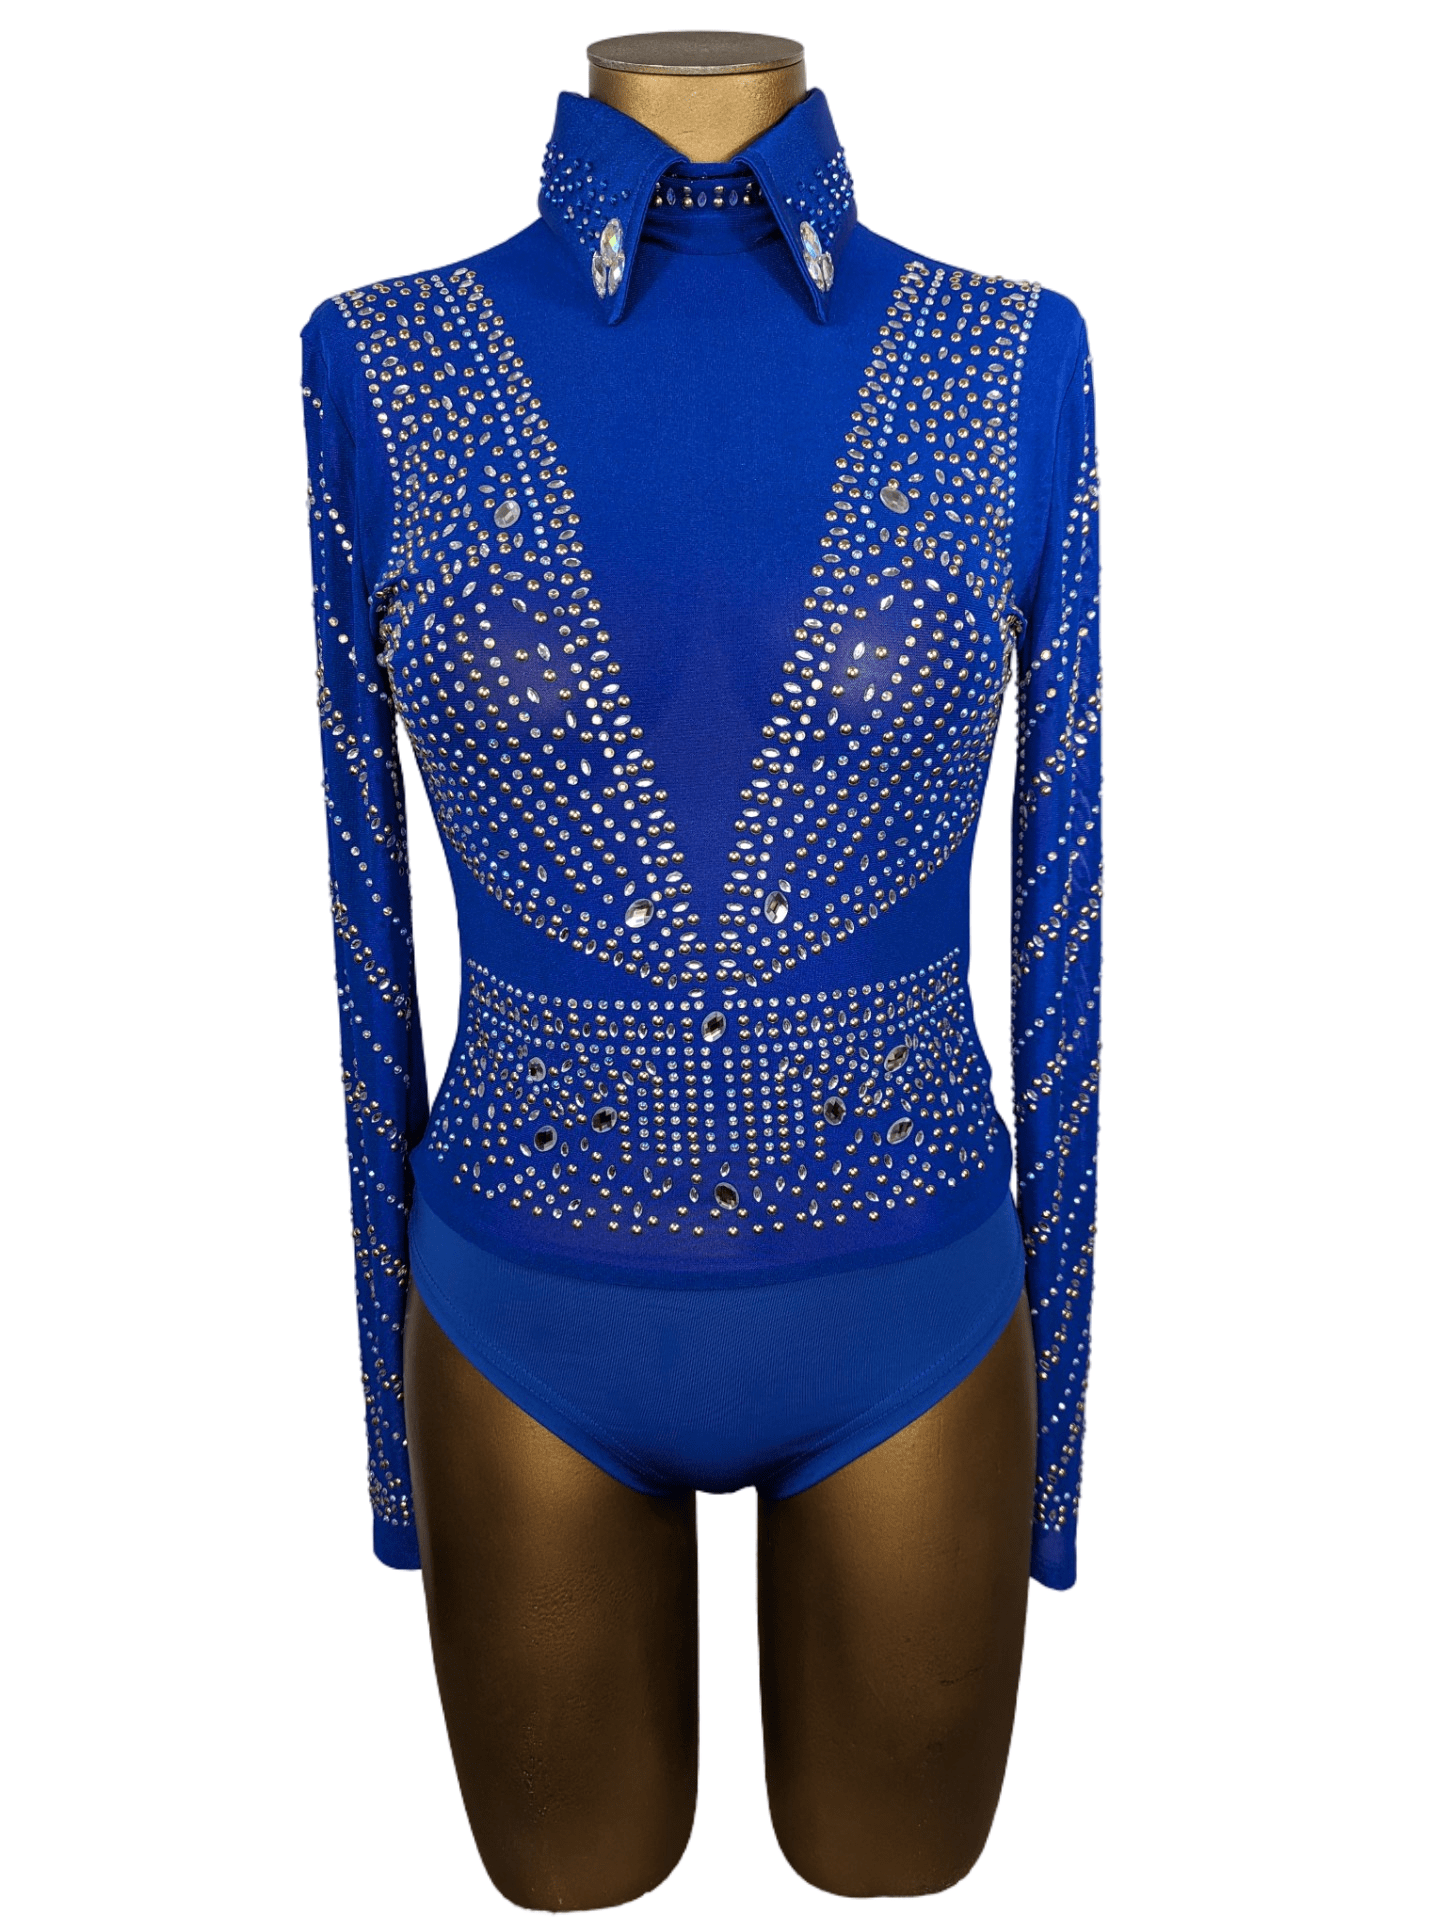 sparkle-ridge-womens-western-wear-affordable-show-clothes-horse-shirts-with-bling-rodeo-bodysuit-royal-blue-deep-v-studdess-front.png (Copy) (Copy)